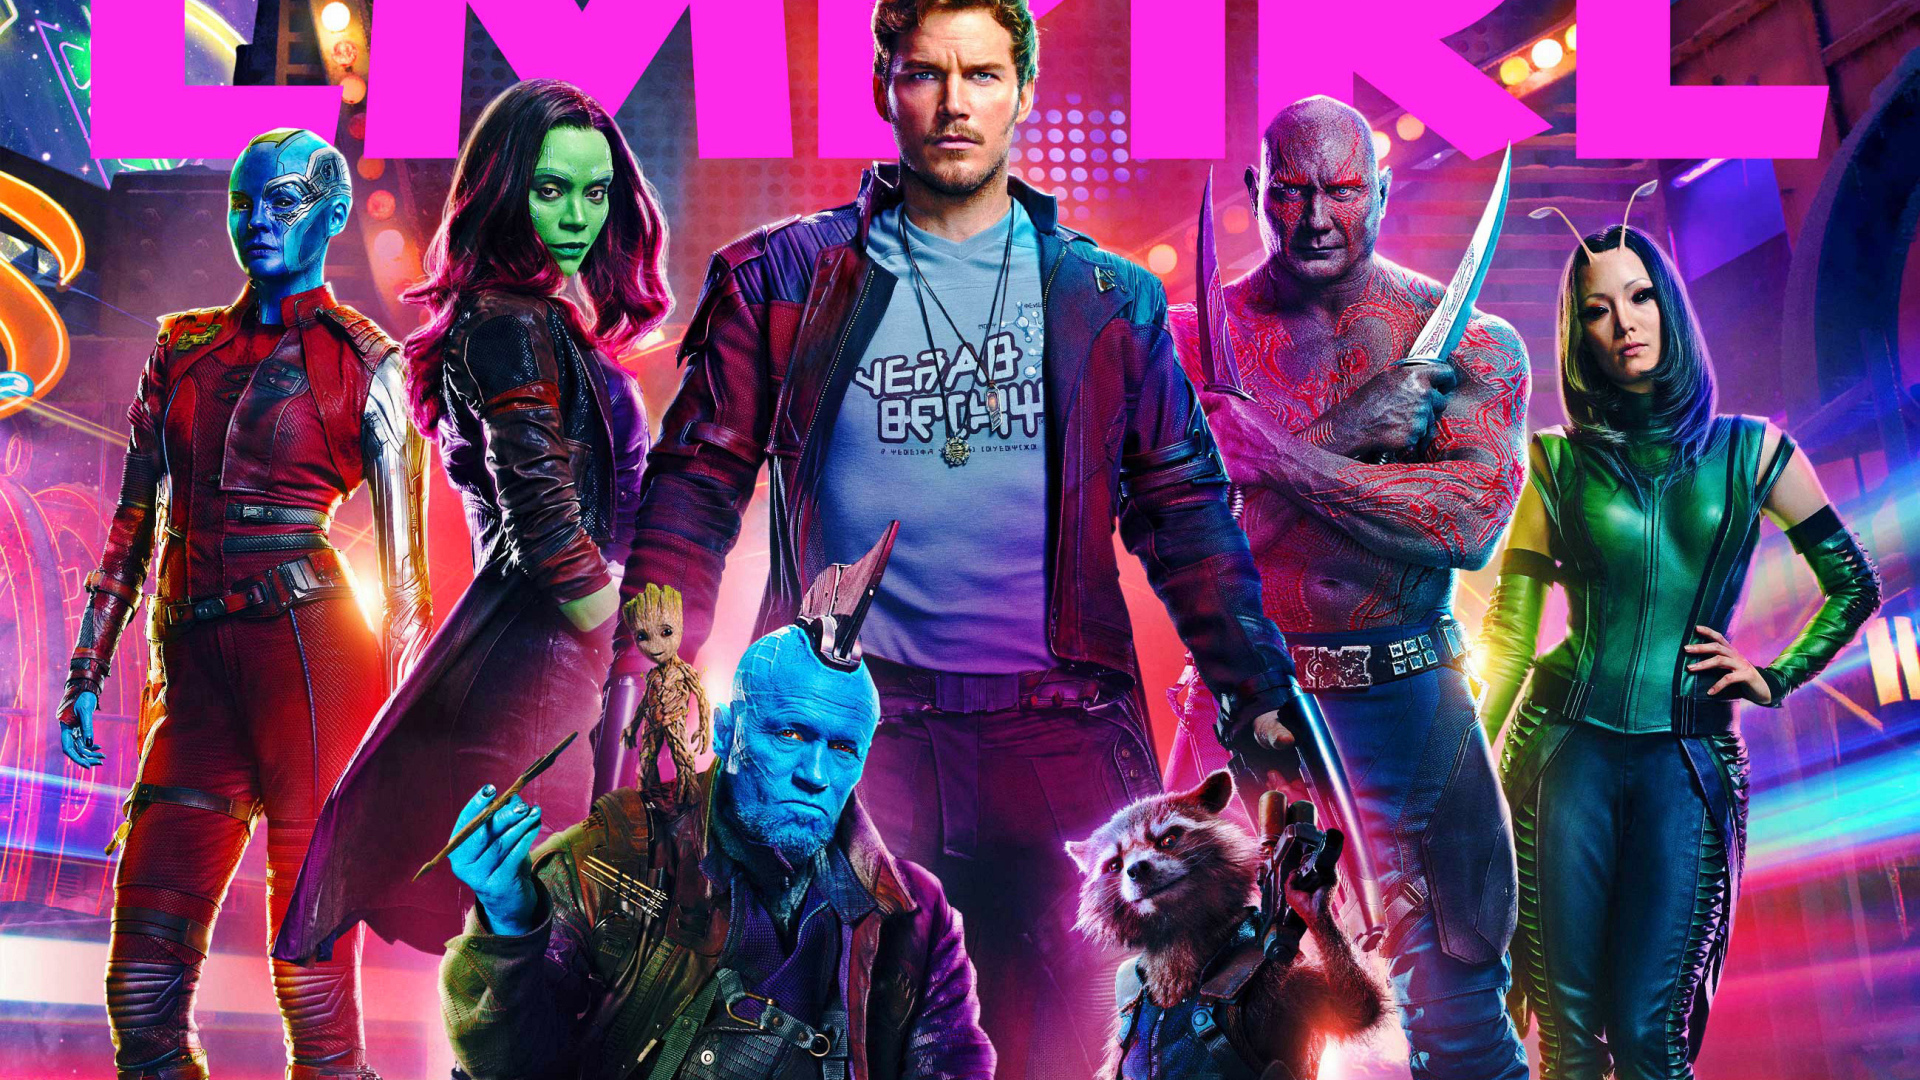 The main superheroes of the film The Guardians of the Galaxy 2